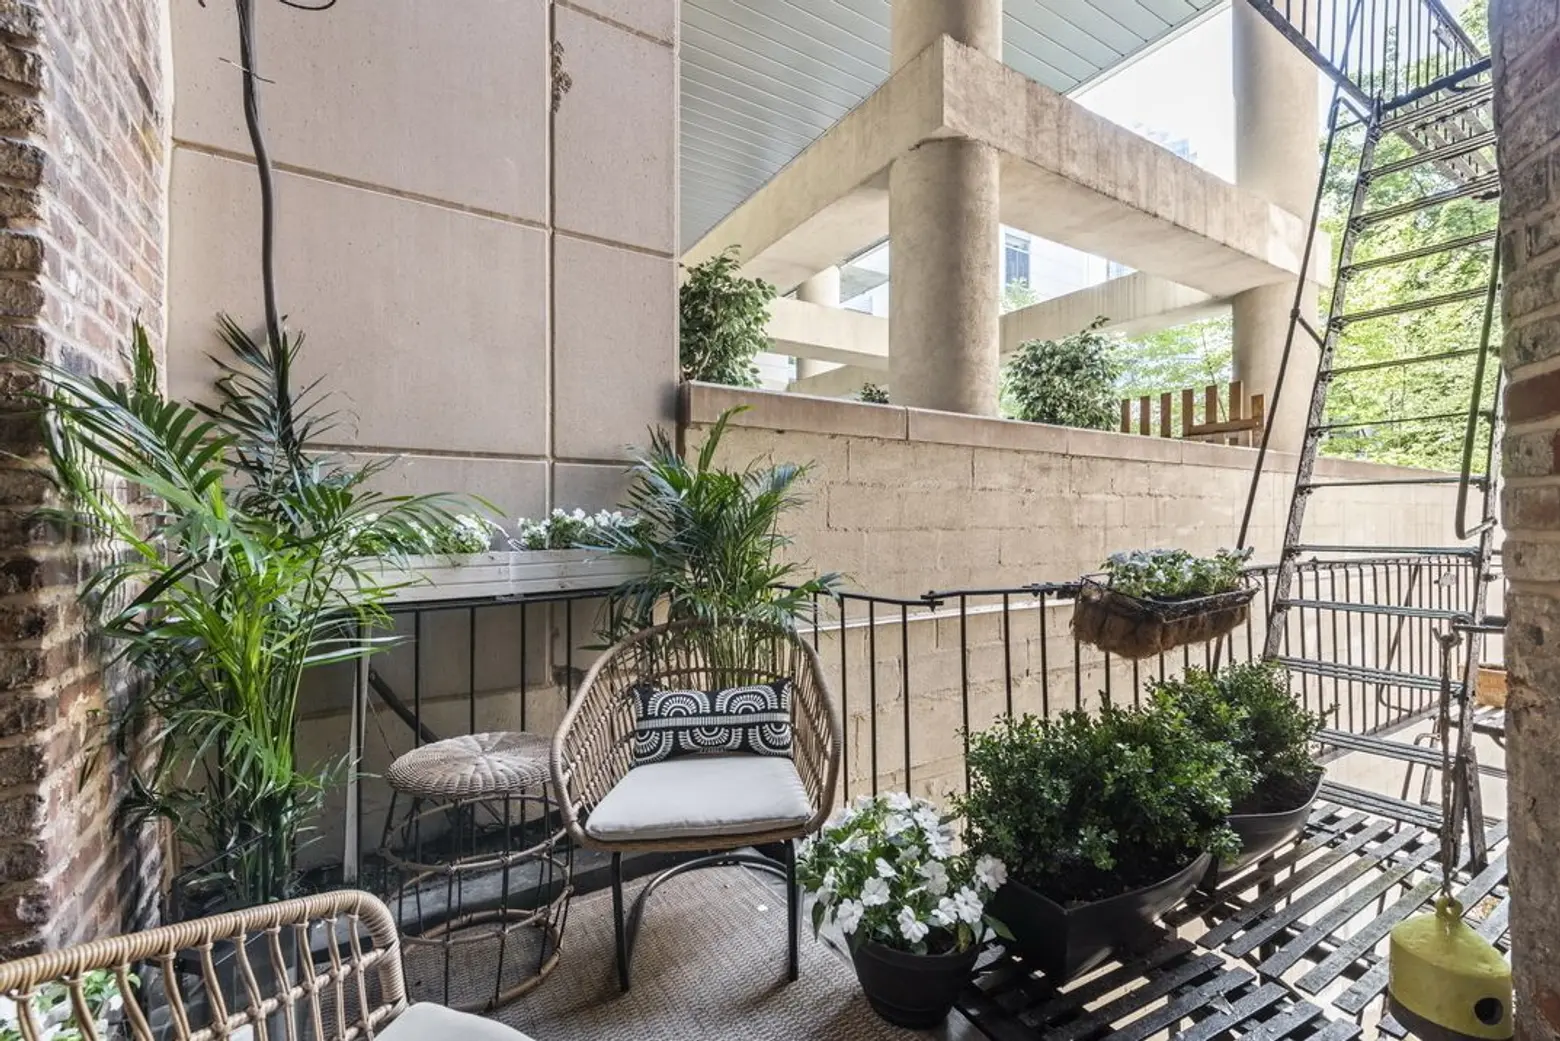 For under $1M, this Soho co-op has a dreamy urban terrace